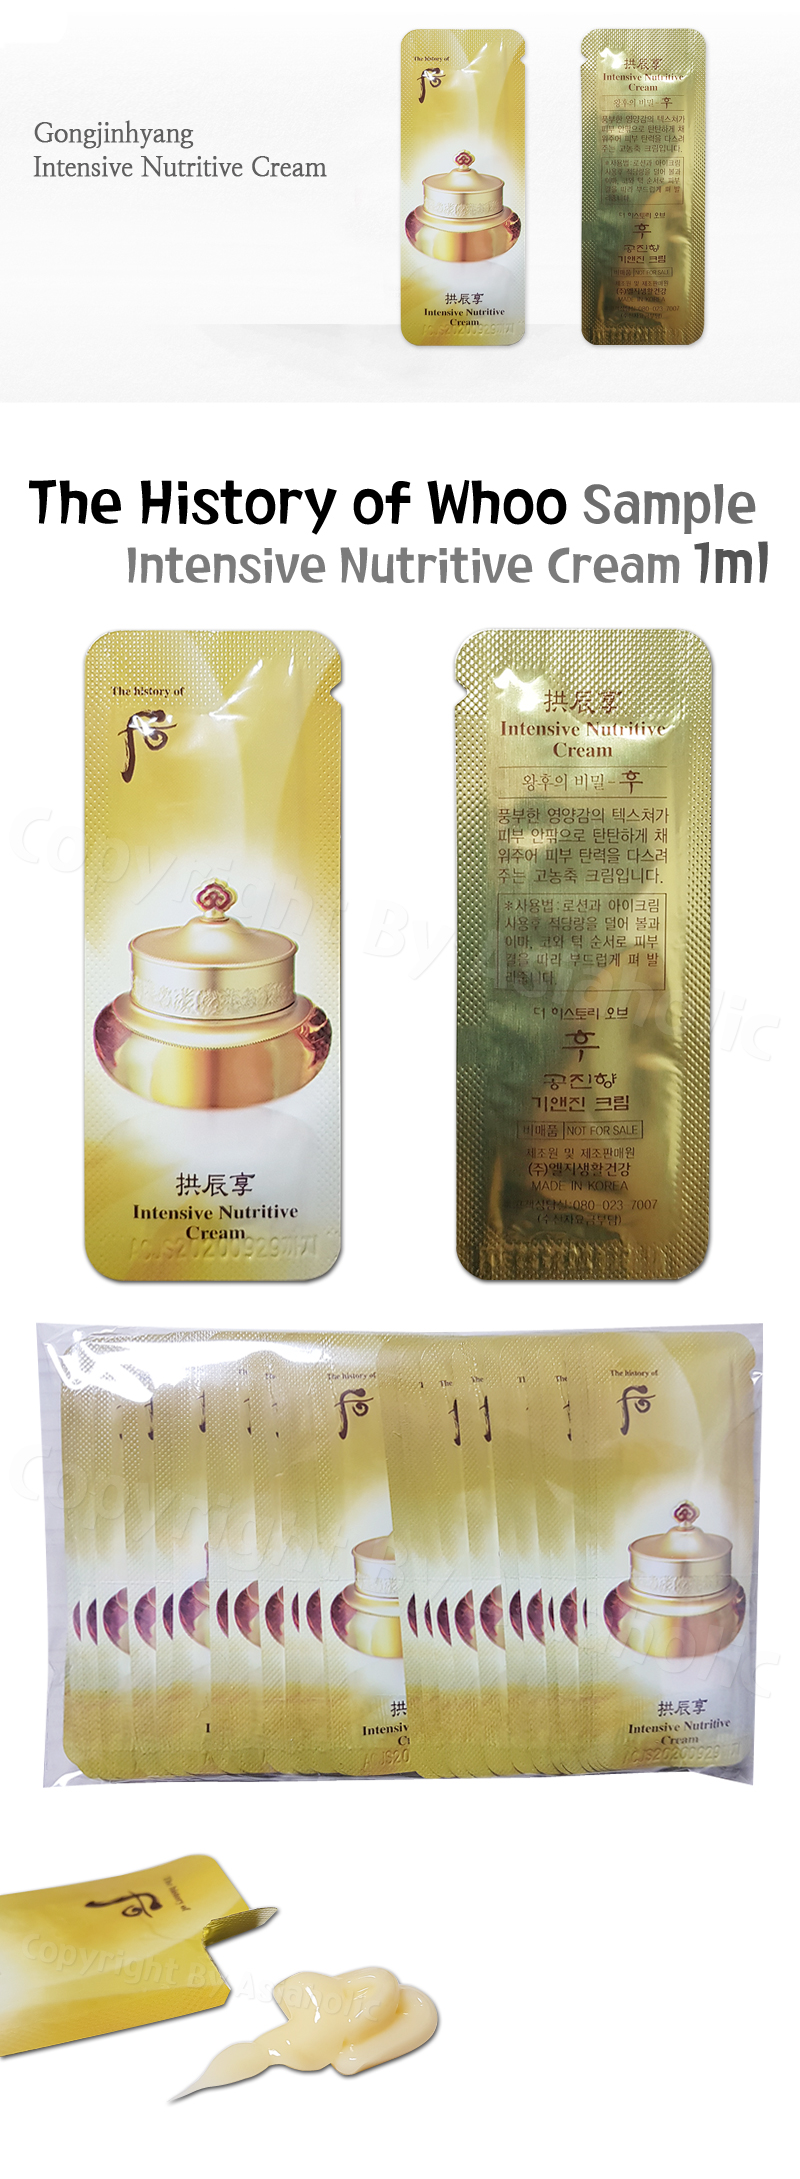 The history of Whoo Intensive Nutritive Cream 1ml x 30pcs (30ml) Sample Newest Version